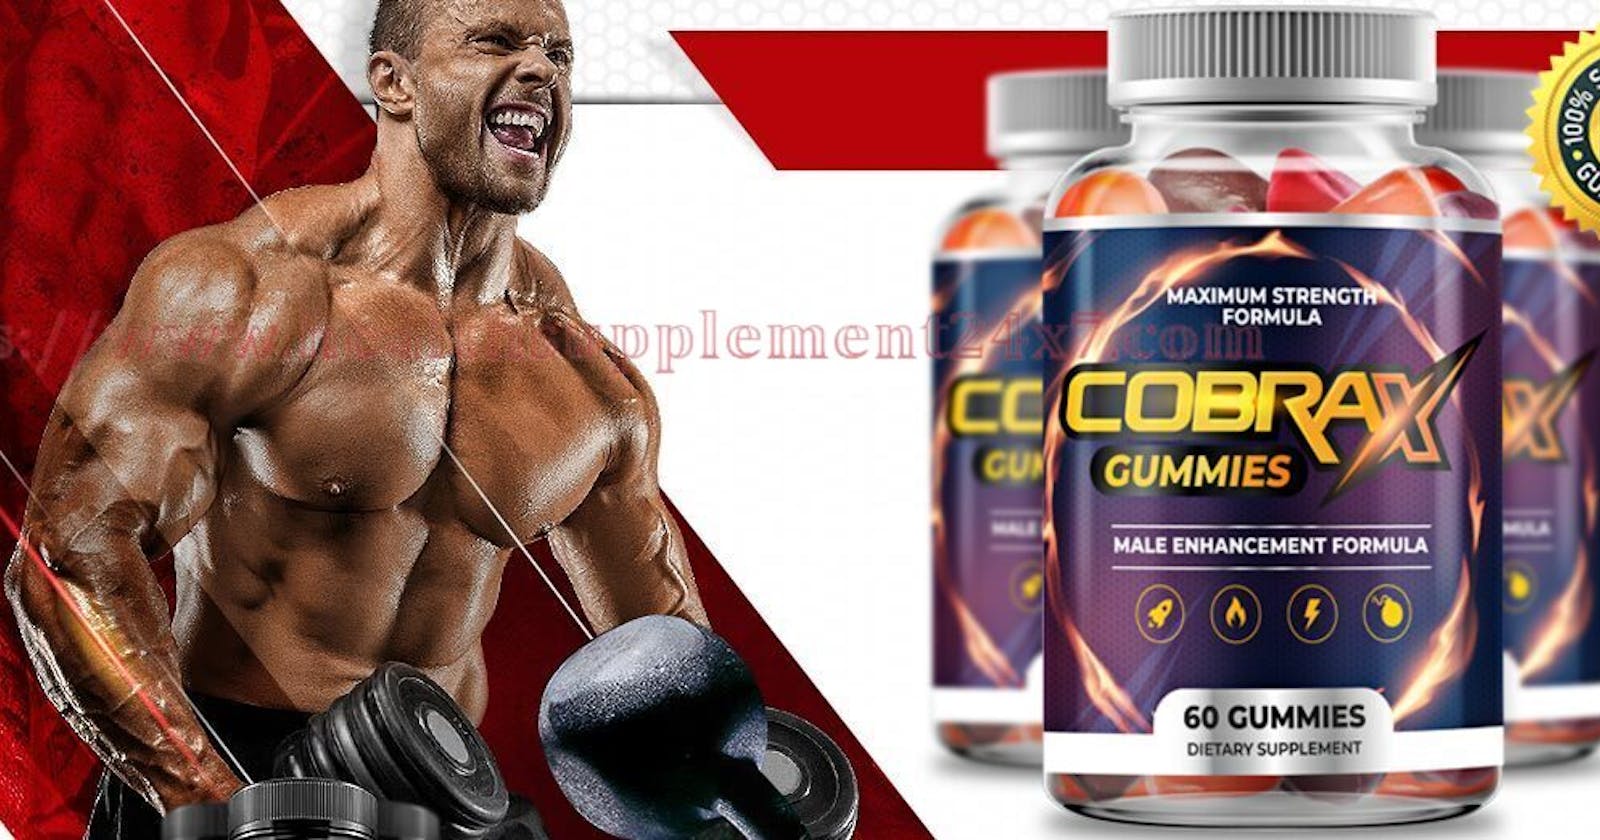 COBRAX Male Enhancement Gummies Reviews – Does It Work OR Scam? FDA Approved! See This: Secrets to Build Sexual Confidence!